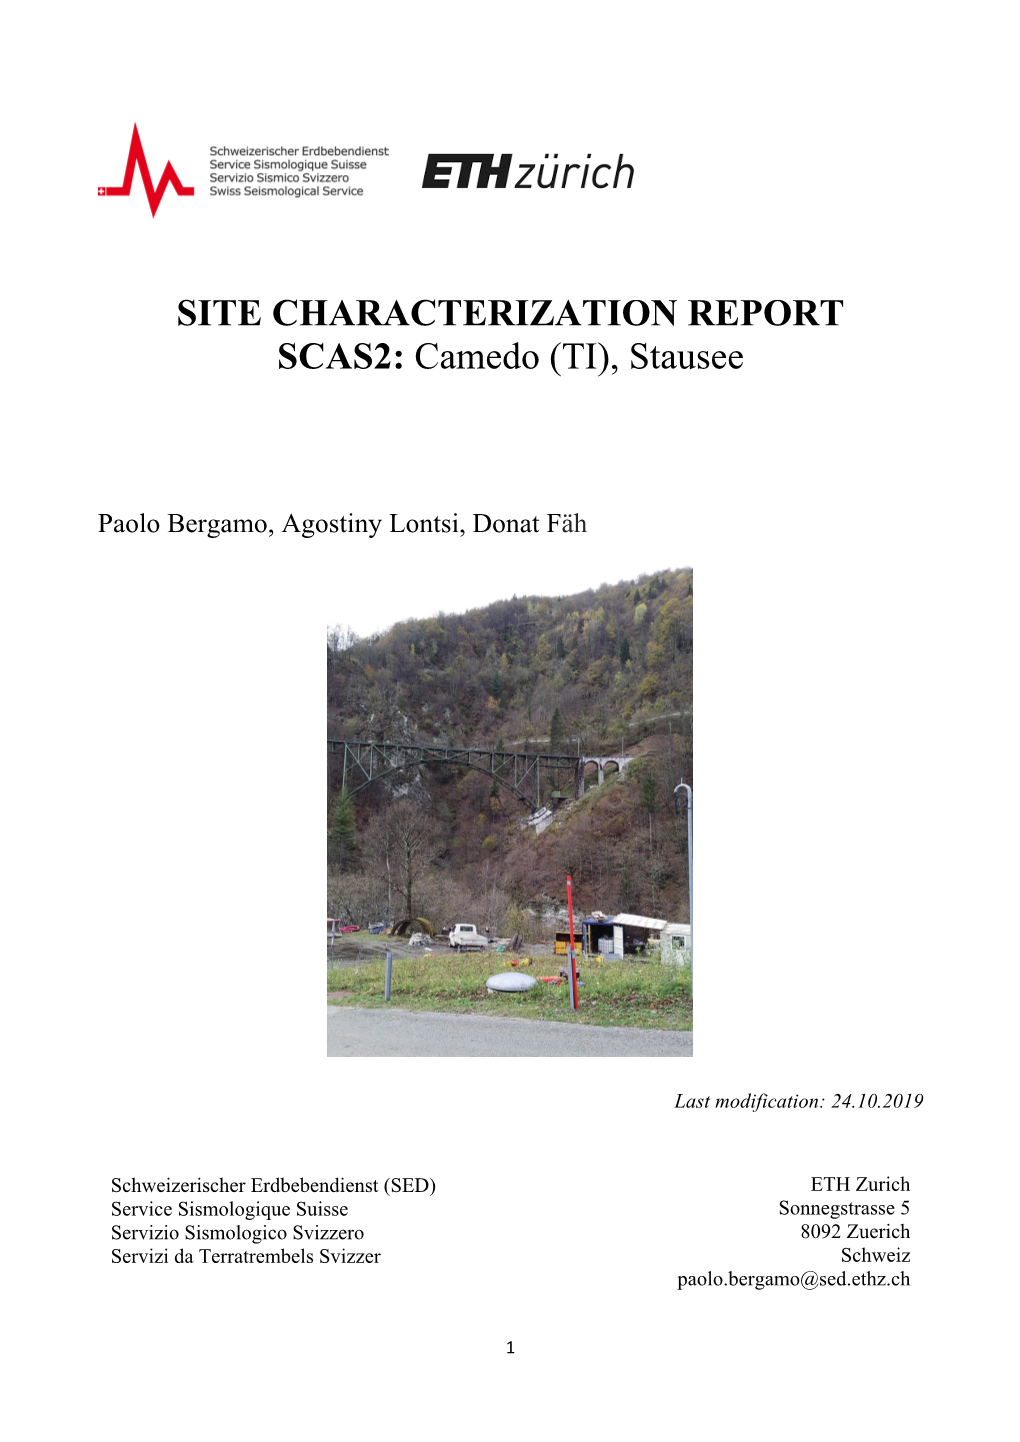 SITE CHARACTERIZATION REPORT SCAS2: Camedo (TI), Stausee